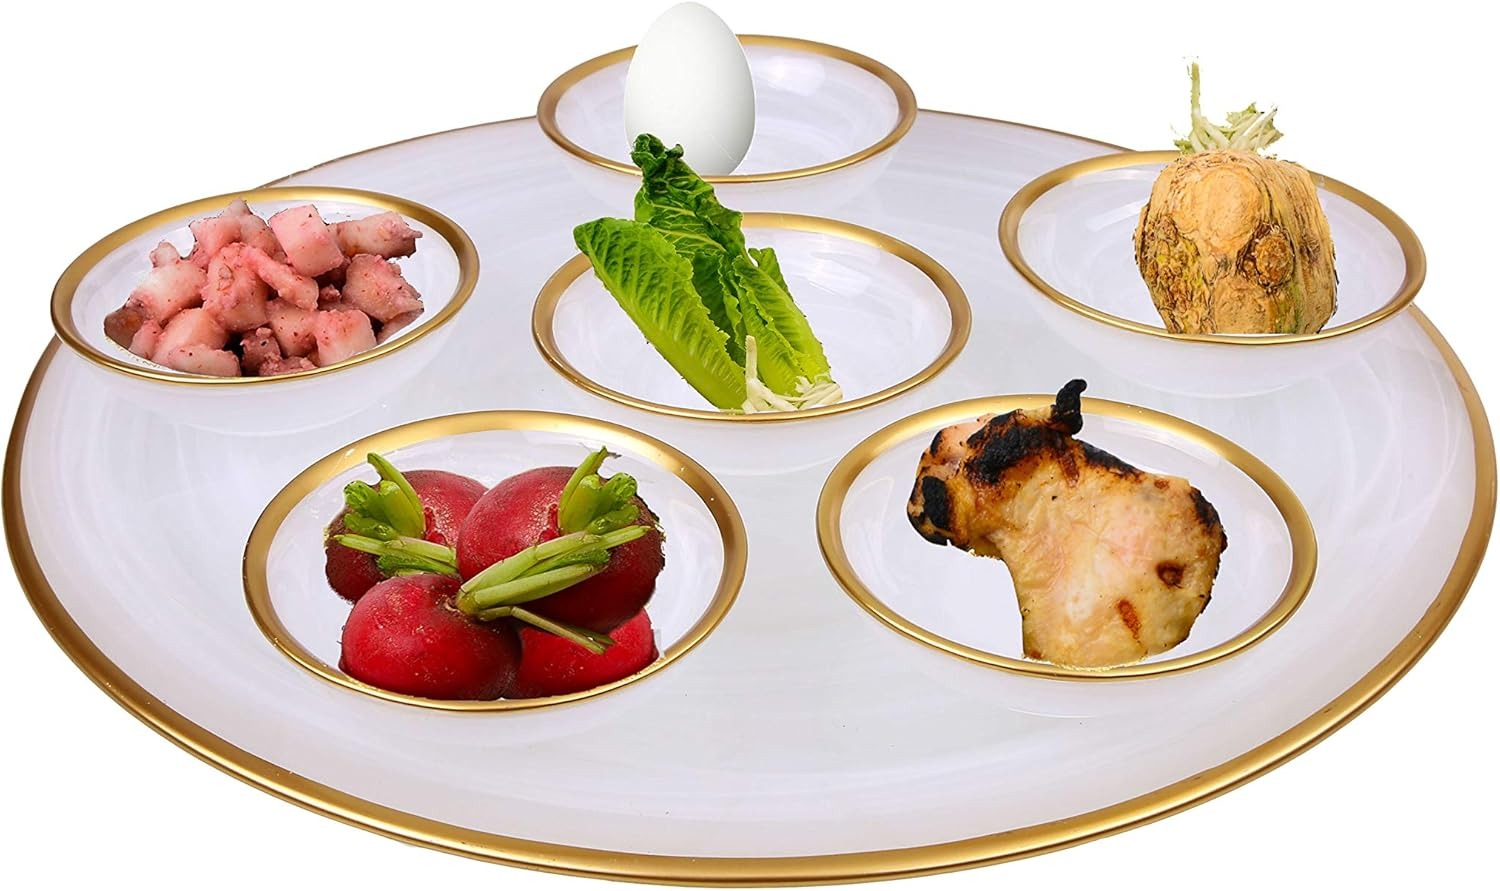 Alabaster White Seder Plate With Gold rim